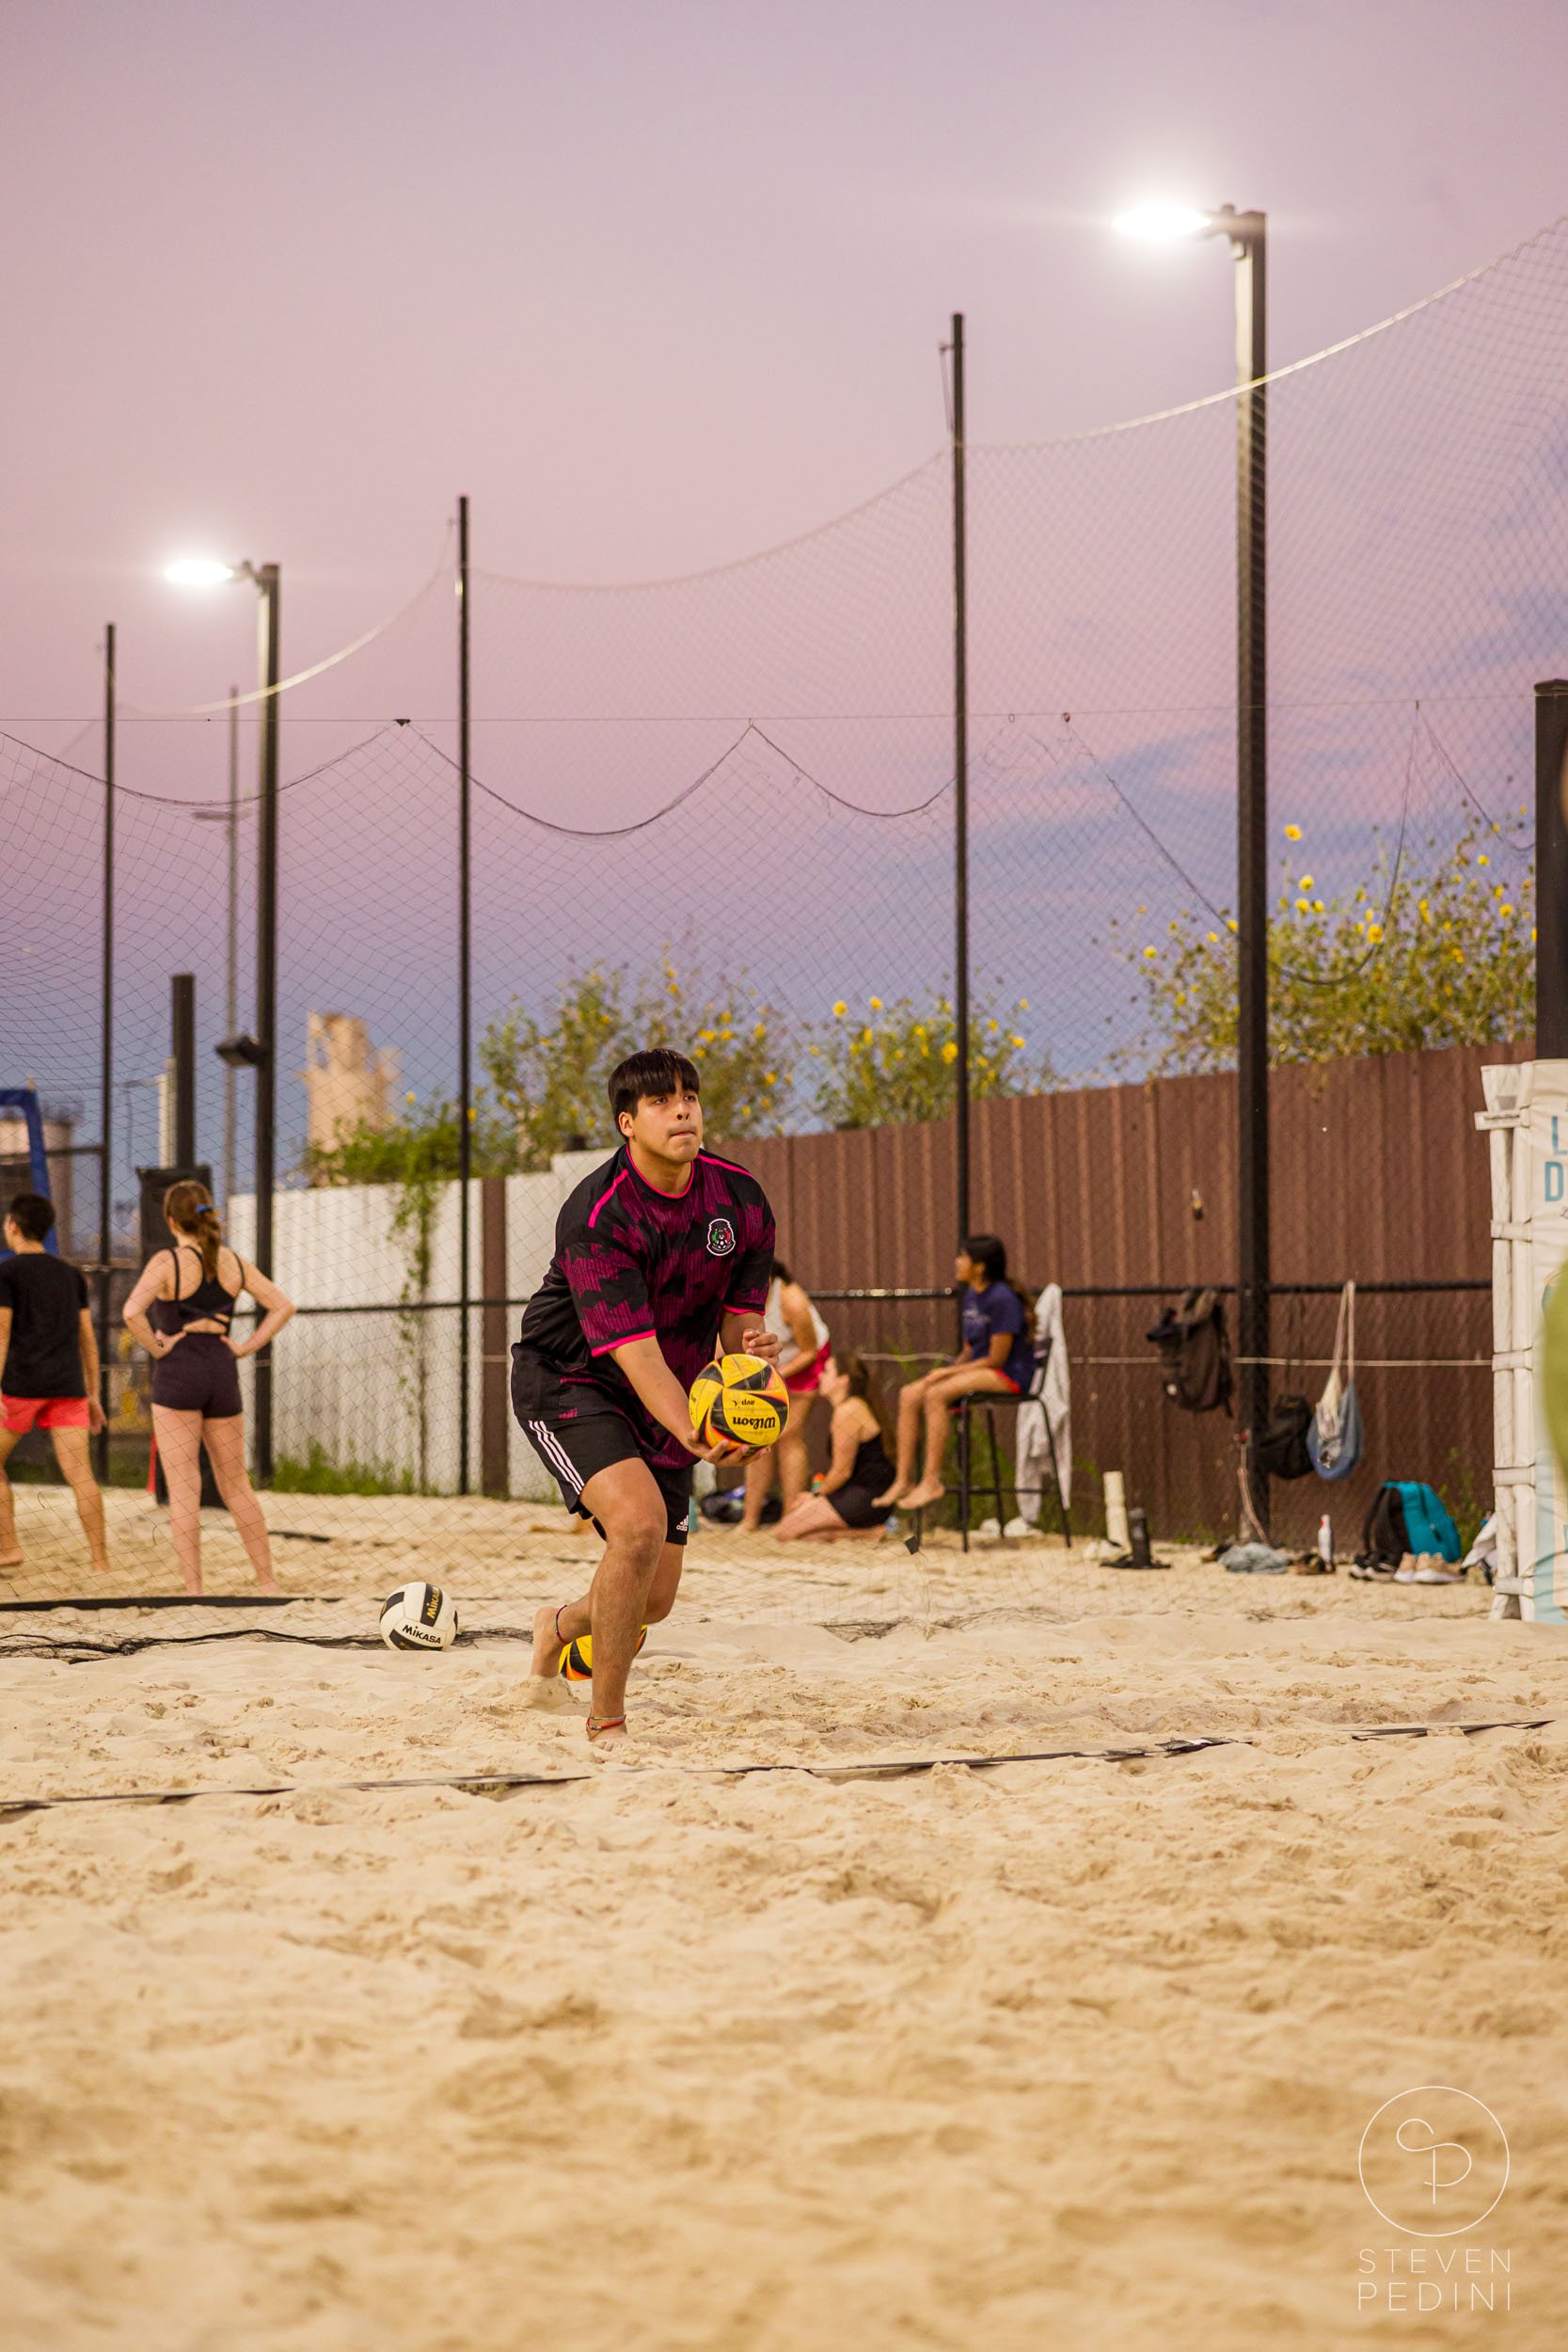 Steven Pedini Photography - Bumpy Pickle - Sand Volleyball - Houston TX - World Cup of Volleyball - 00281.jpg